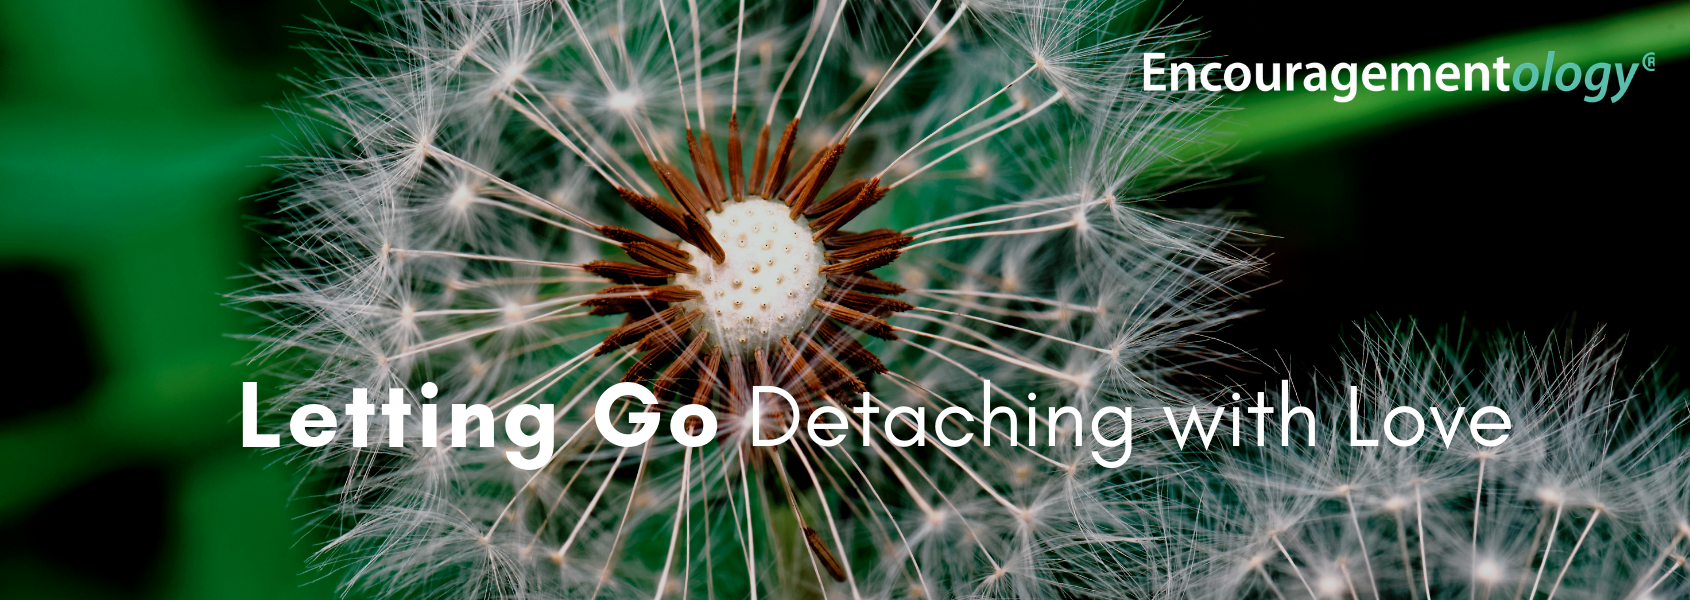 Letting Go Detaching with Love